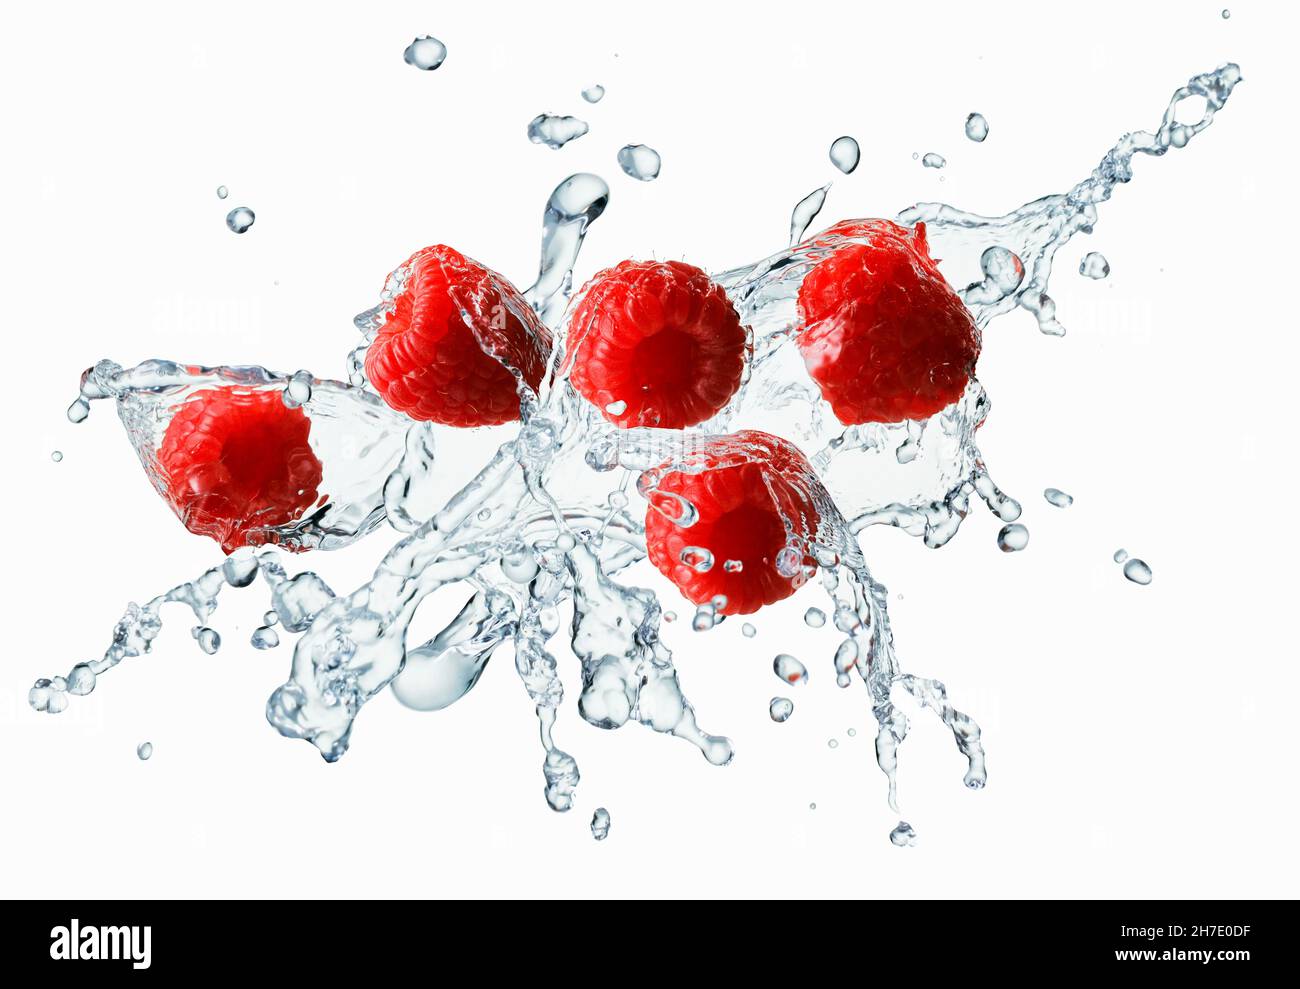 Raspberries with a splash of water Stock Photo